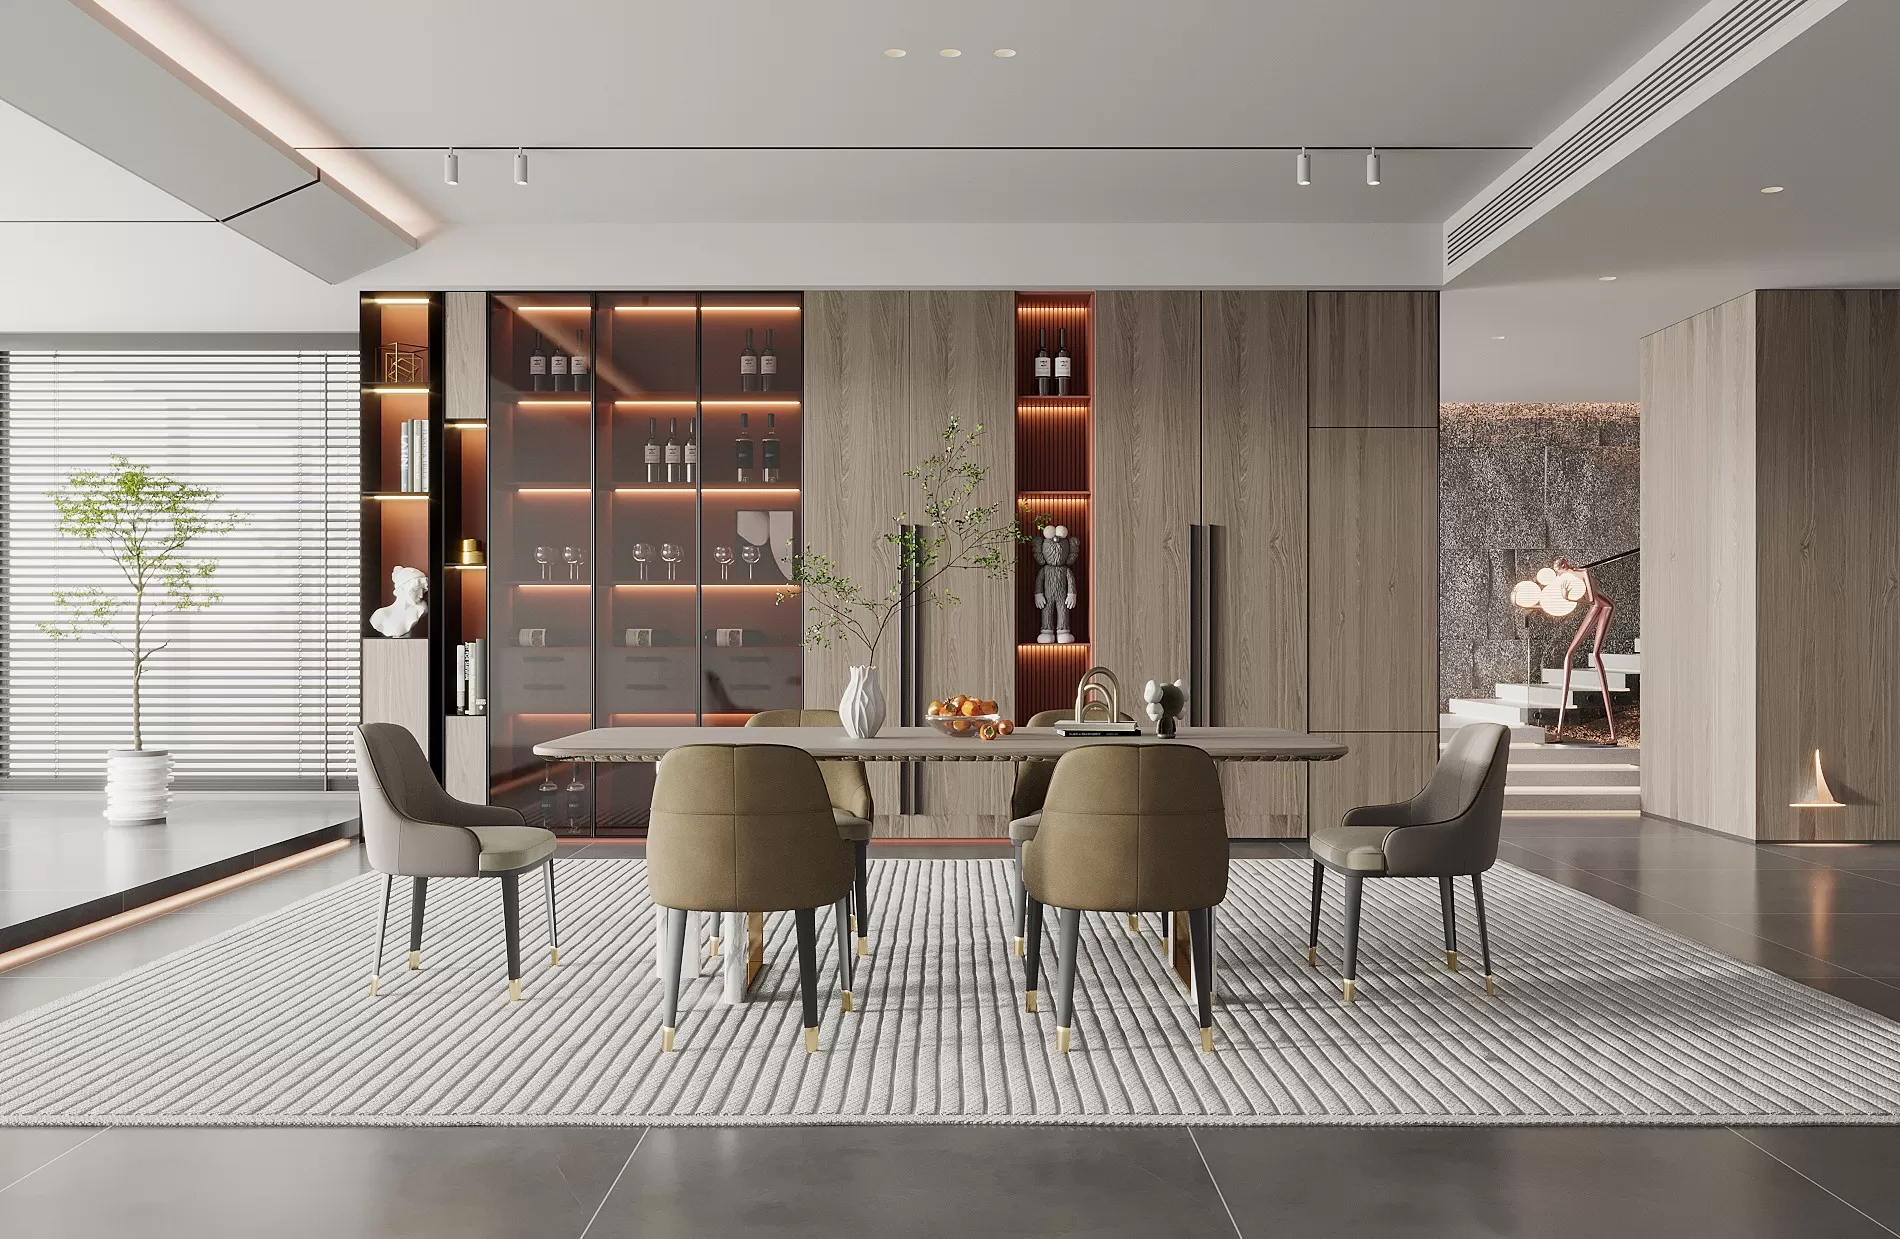 HOUSE SPACE 3D SCENES – DINING ROOM – 0053